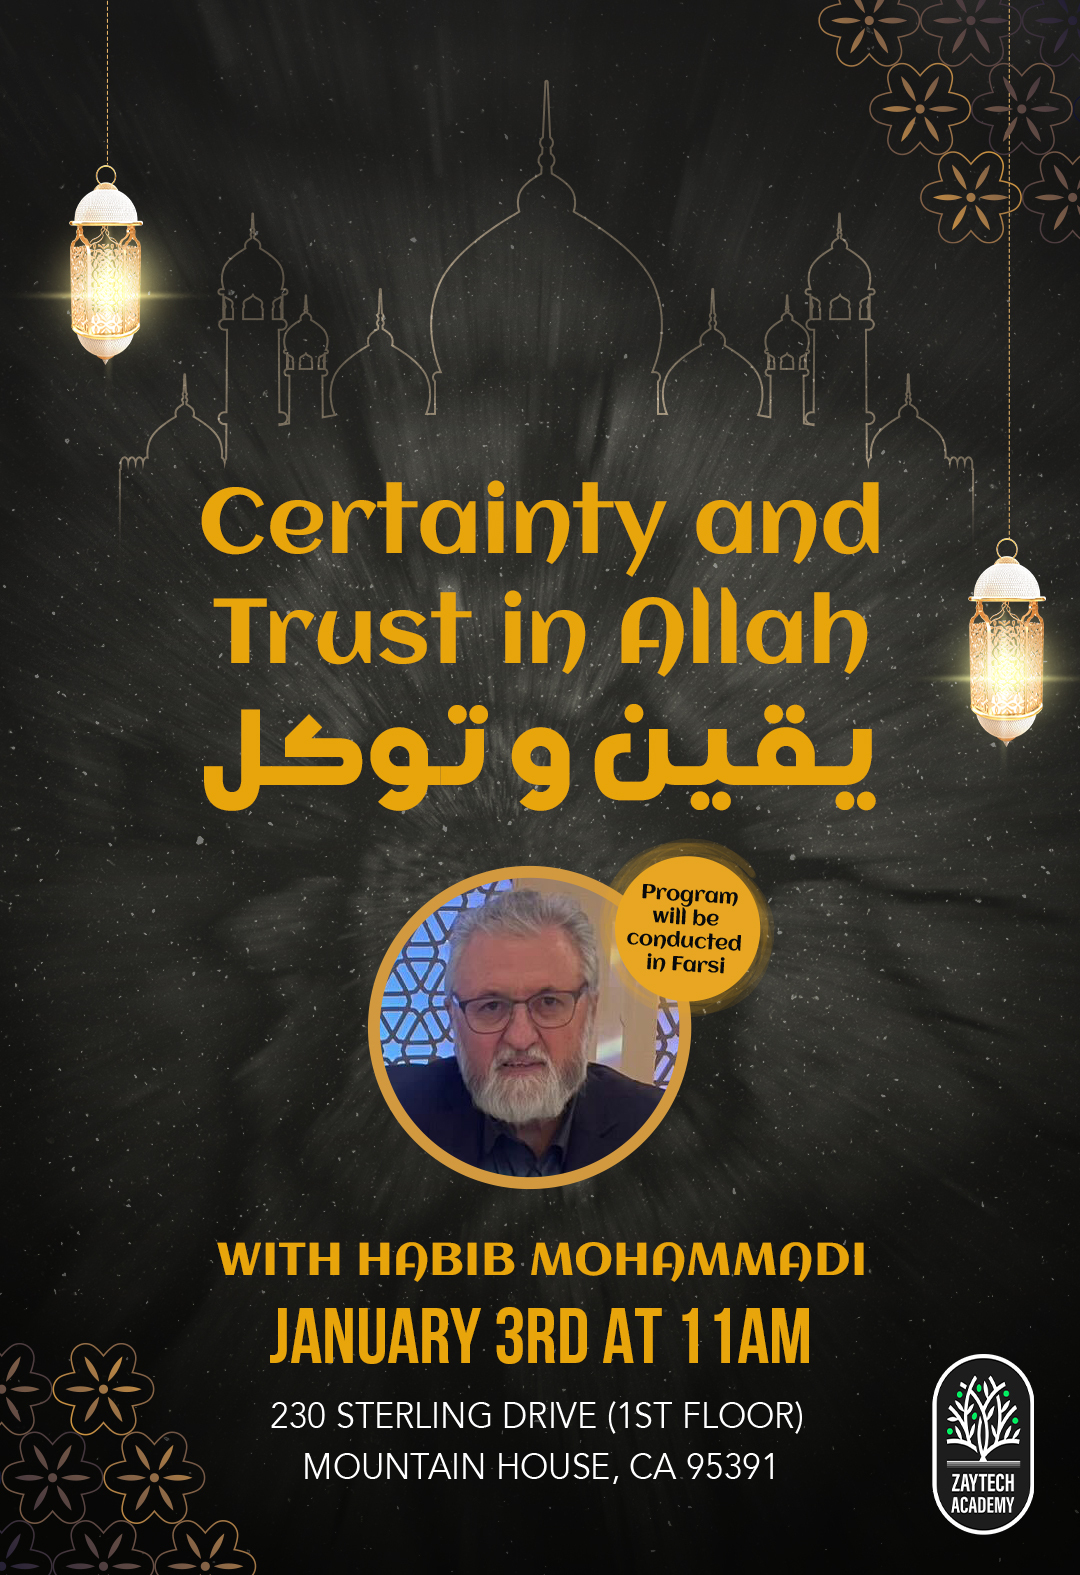 Certainty and Trust in Allah at Zaytech Academy with Habib Mohammadi in Farsi